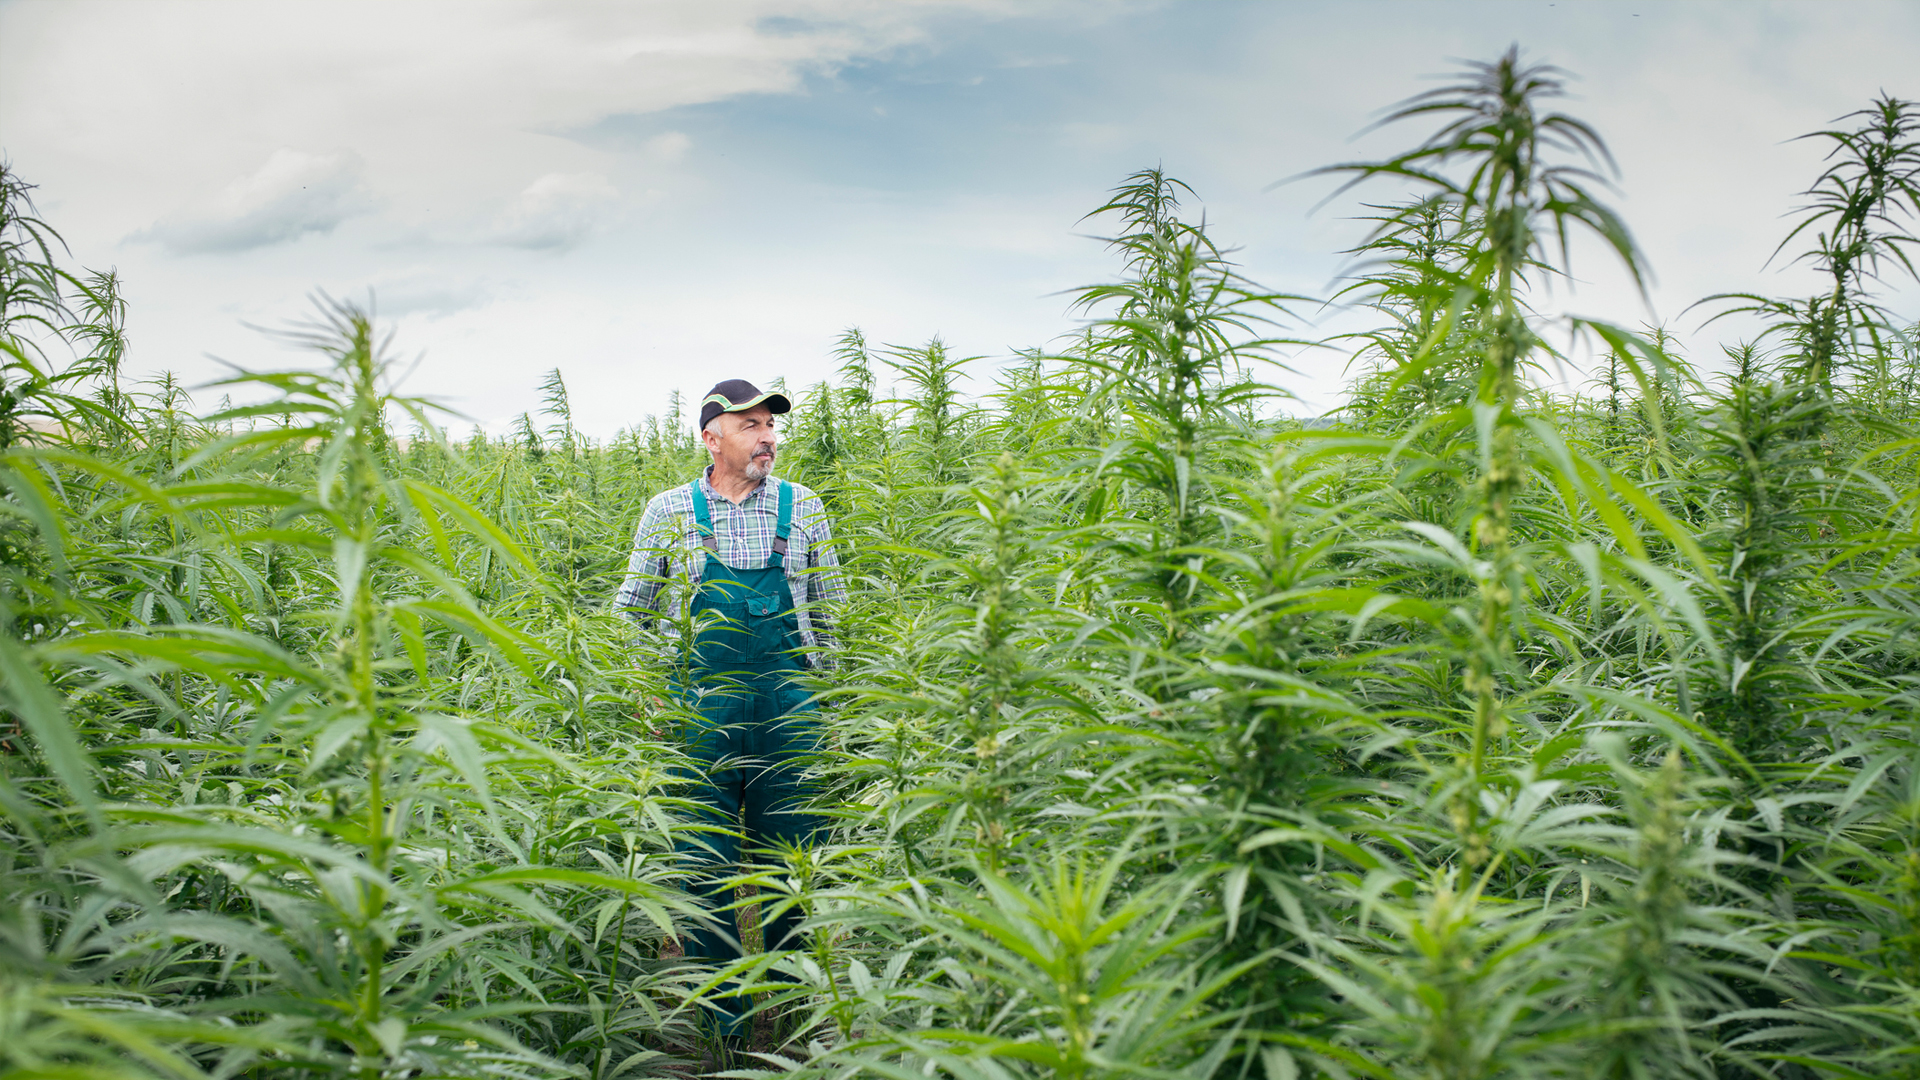 UK policy oversight sees farmers waste millions of pounds worth of CBD